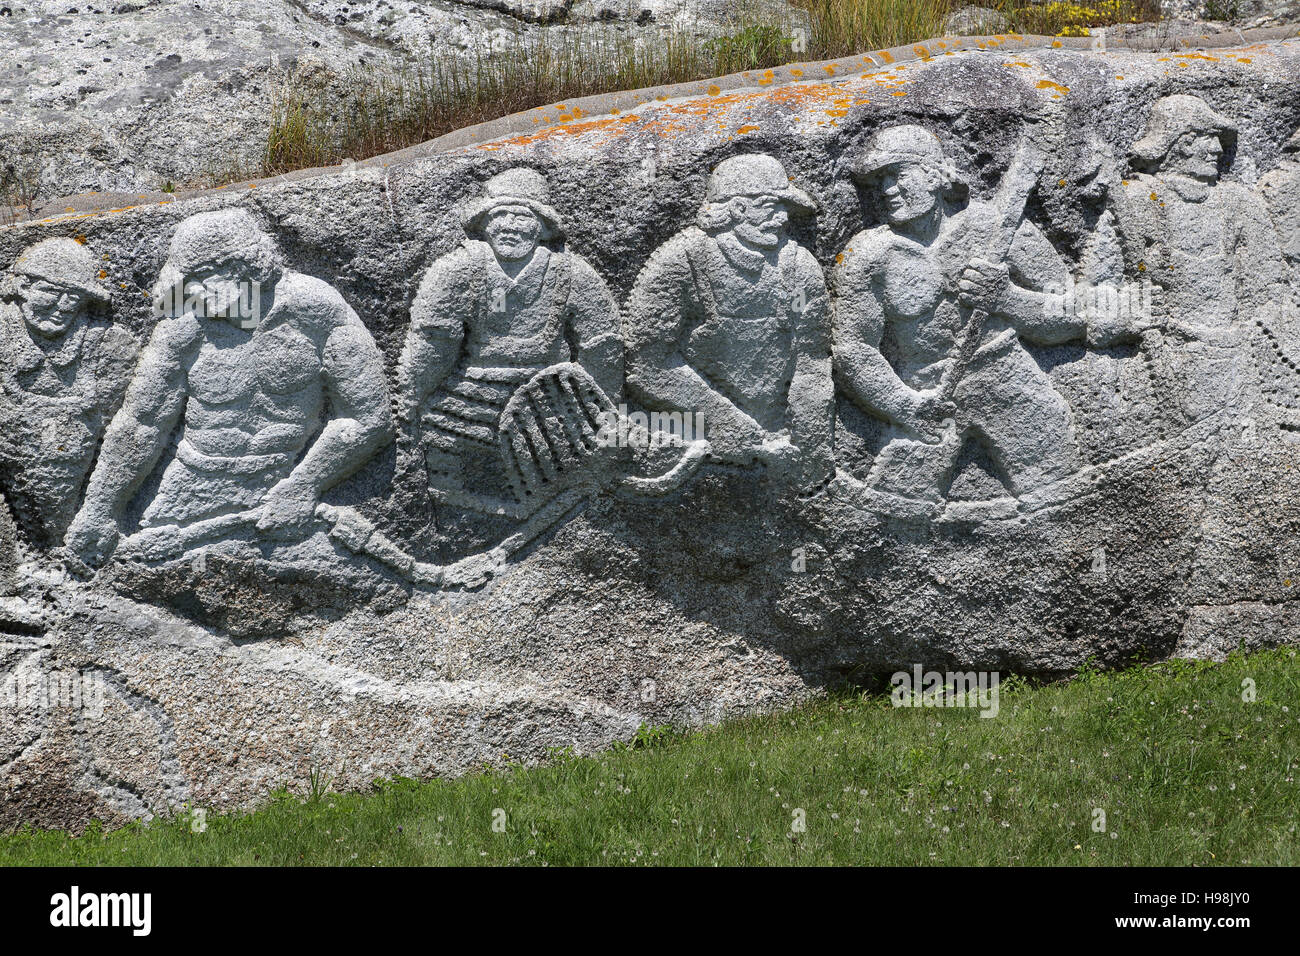 Detail from the Fishermen's Monument at Peggy's Cove in Nova Scotia, Canada. Stock Photo